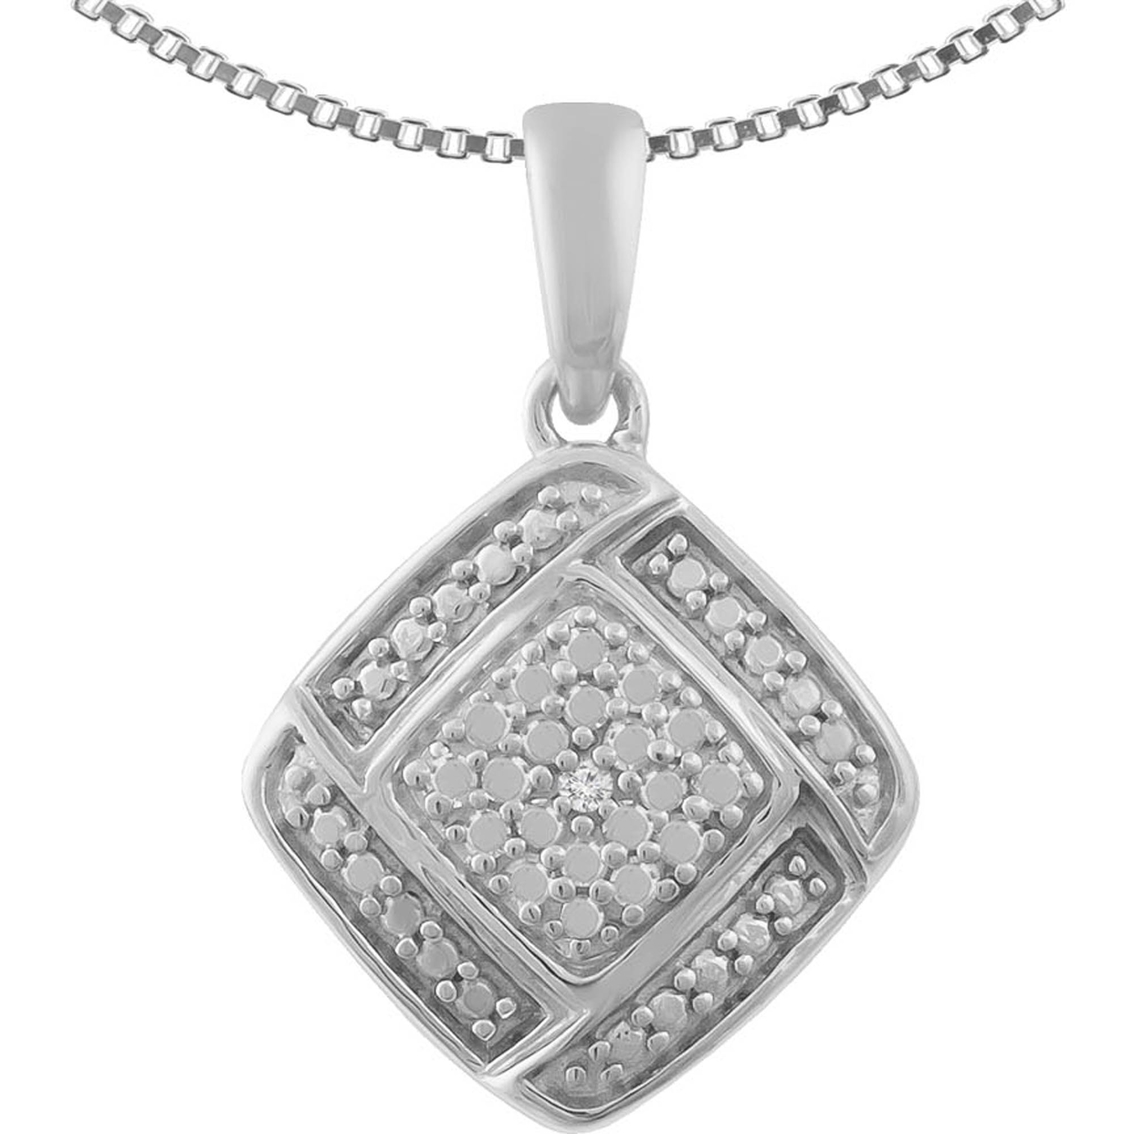 Sterling Silver Diamond Accent Pendant, Earrings and Ring Box Set - Image 4 of 4